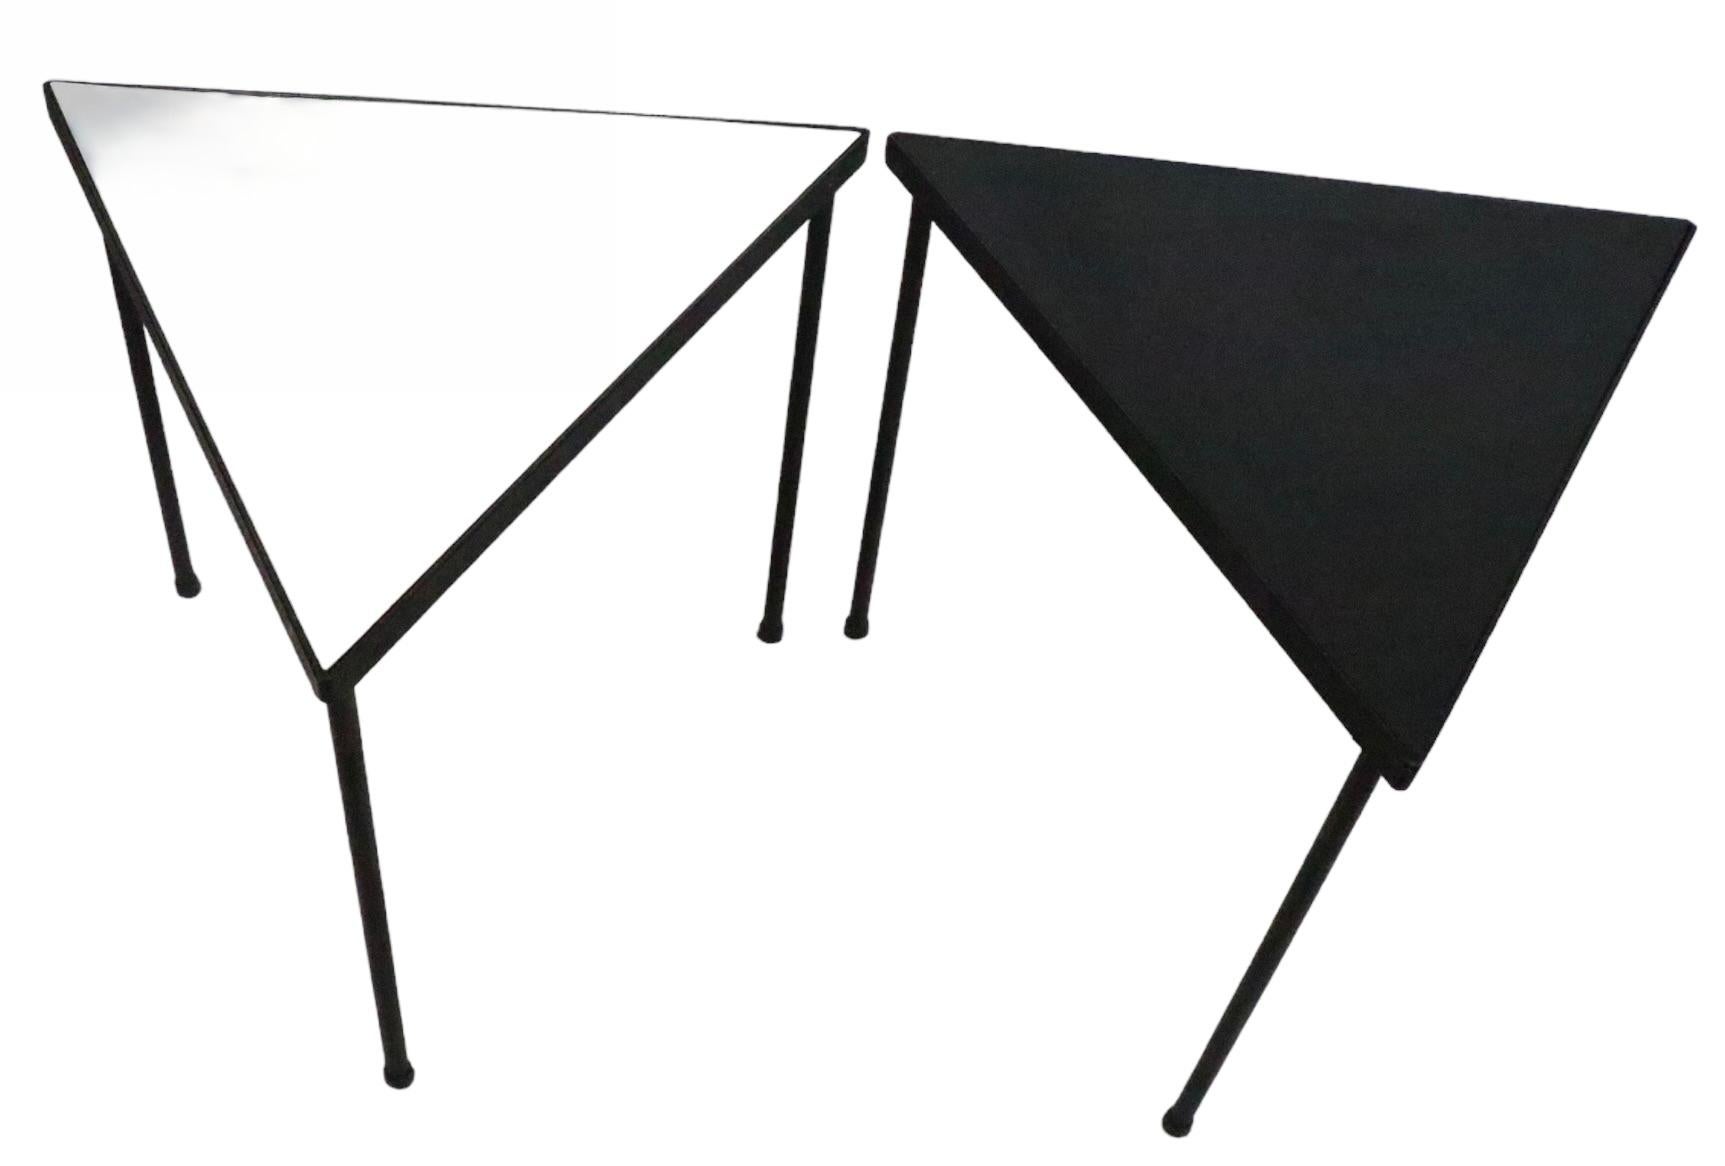  Set of 3 Mid Century Triangular  Stacking Tables by Frederic  Weinberg c 1950's In Good Condition For Sale In New York, NY